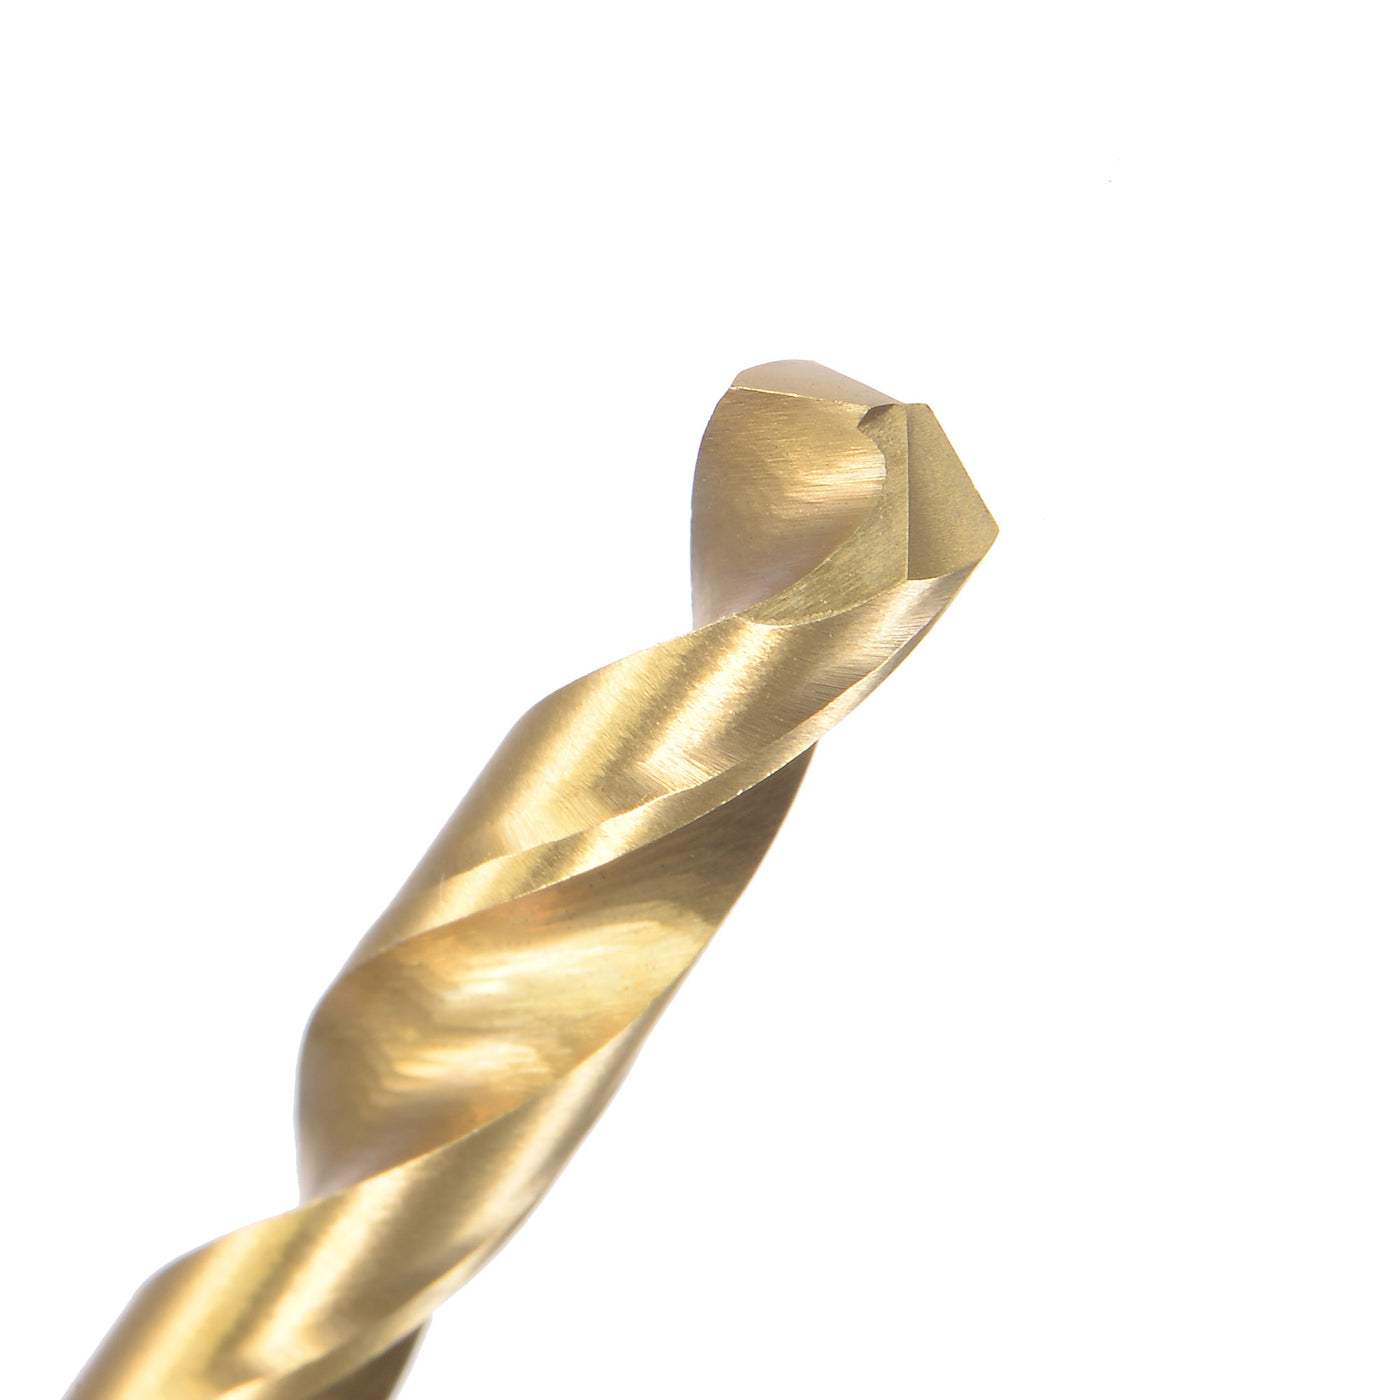 uxcell Uxcell High Speed Steel Twist Drill Bit 5.6mm Fully Ground Titanium Coated 2 Pcs